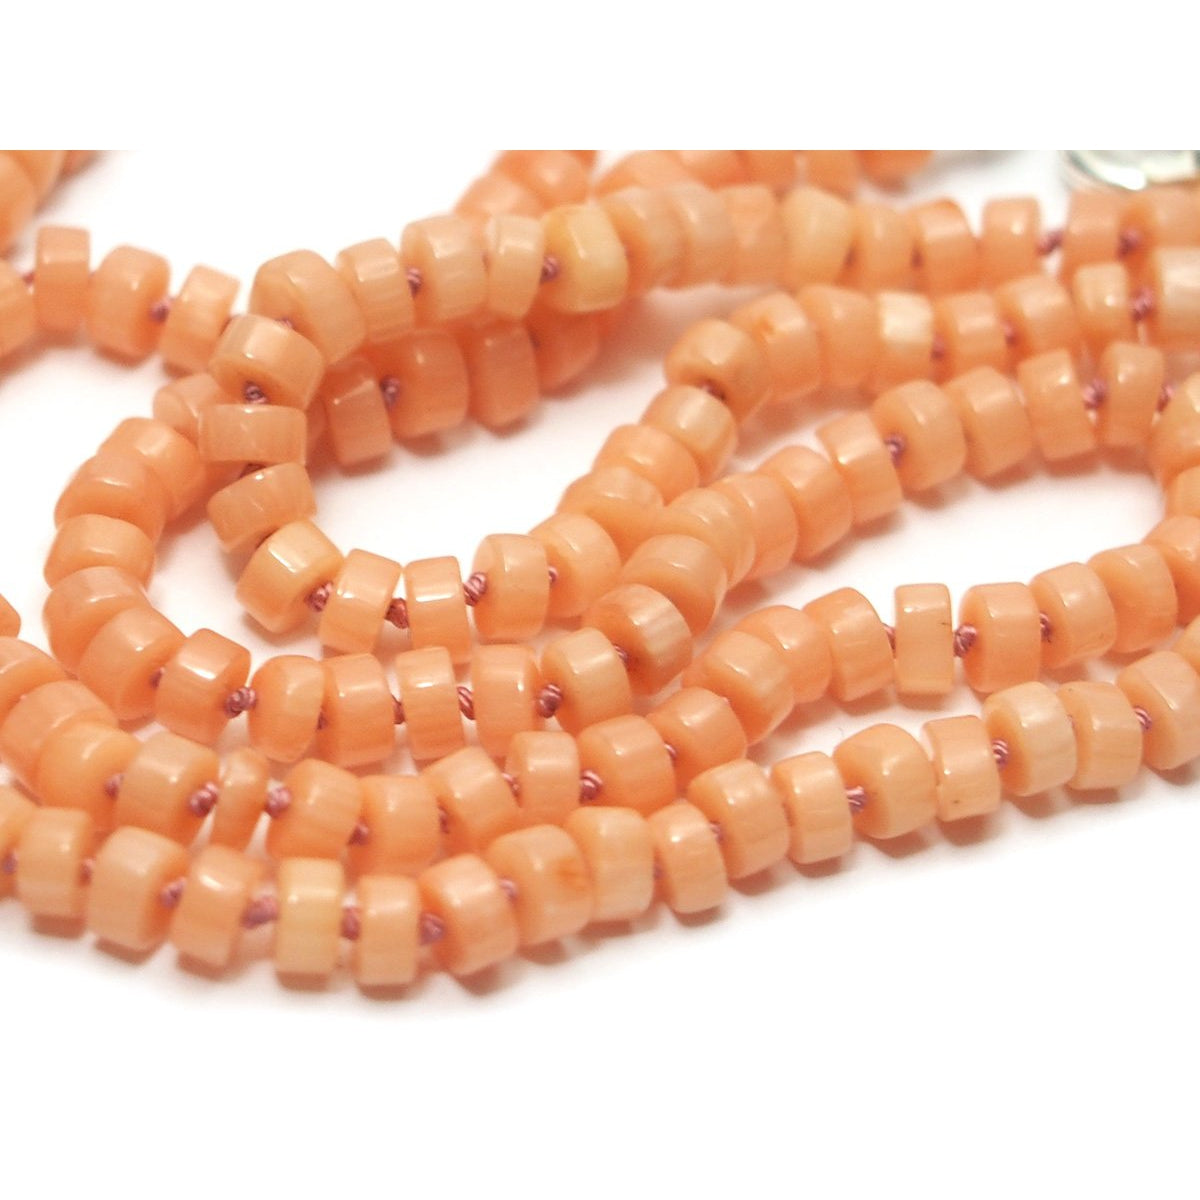 Fish Hook Clasp on Angel Skin Coral Beads. – Antique Jewelry University